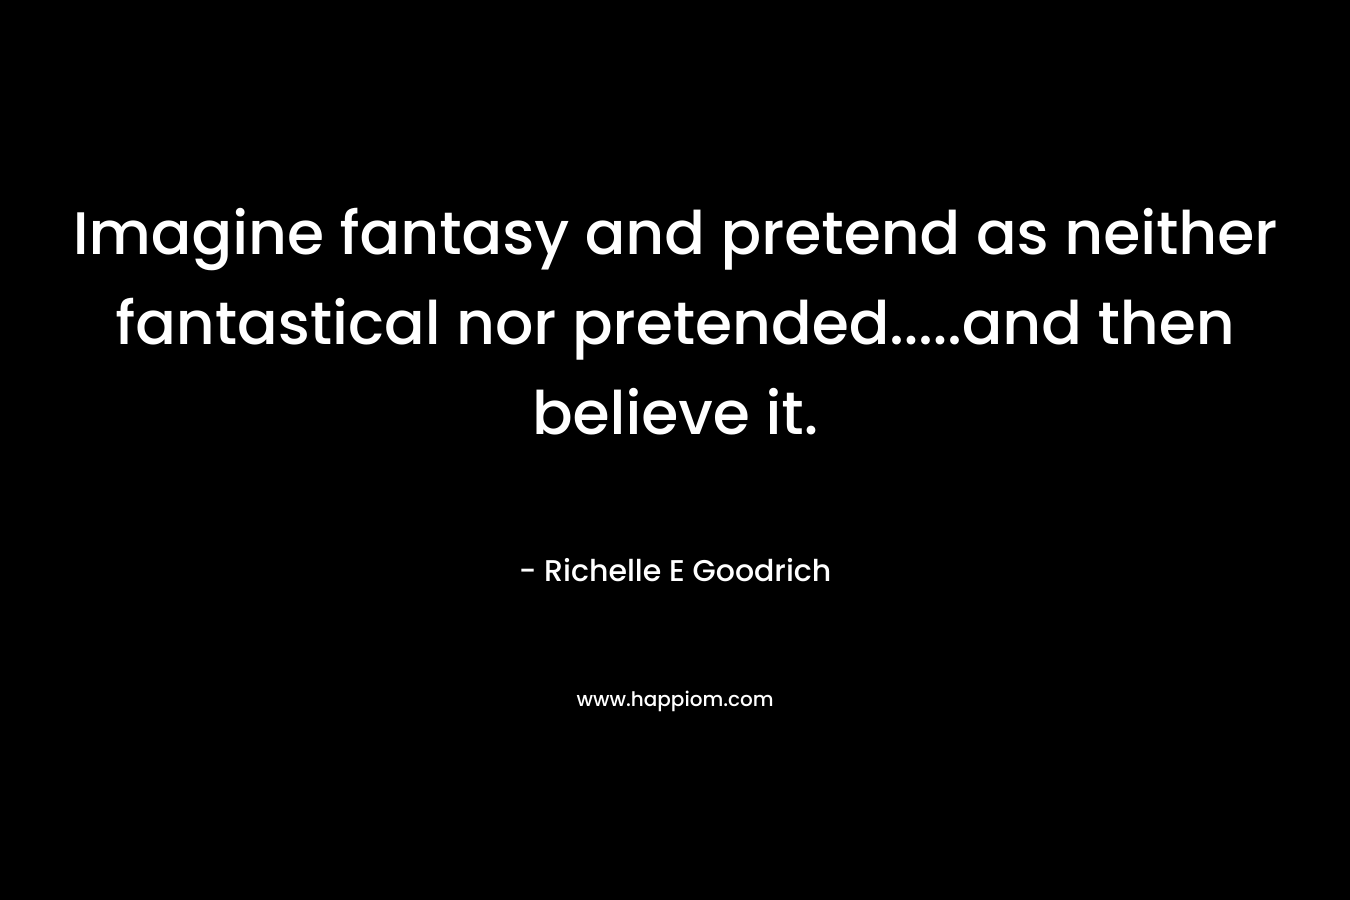 Imagine fantasy and pretend as neither fantastical nor pretended.....and then believe it.